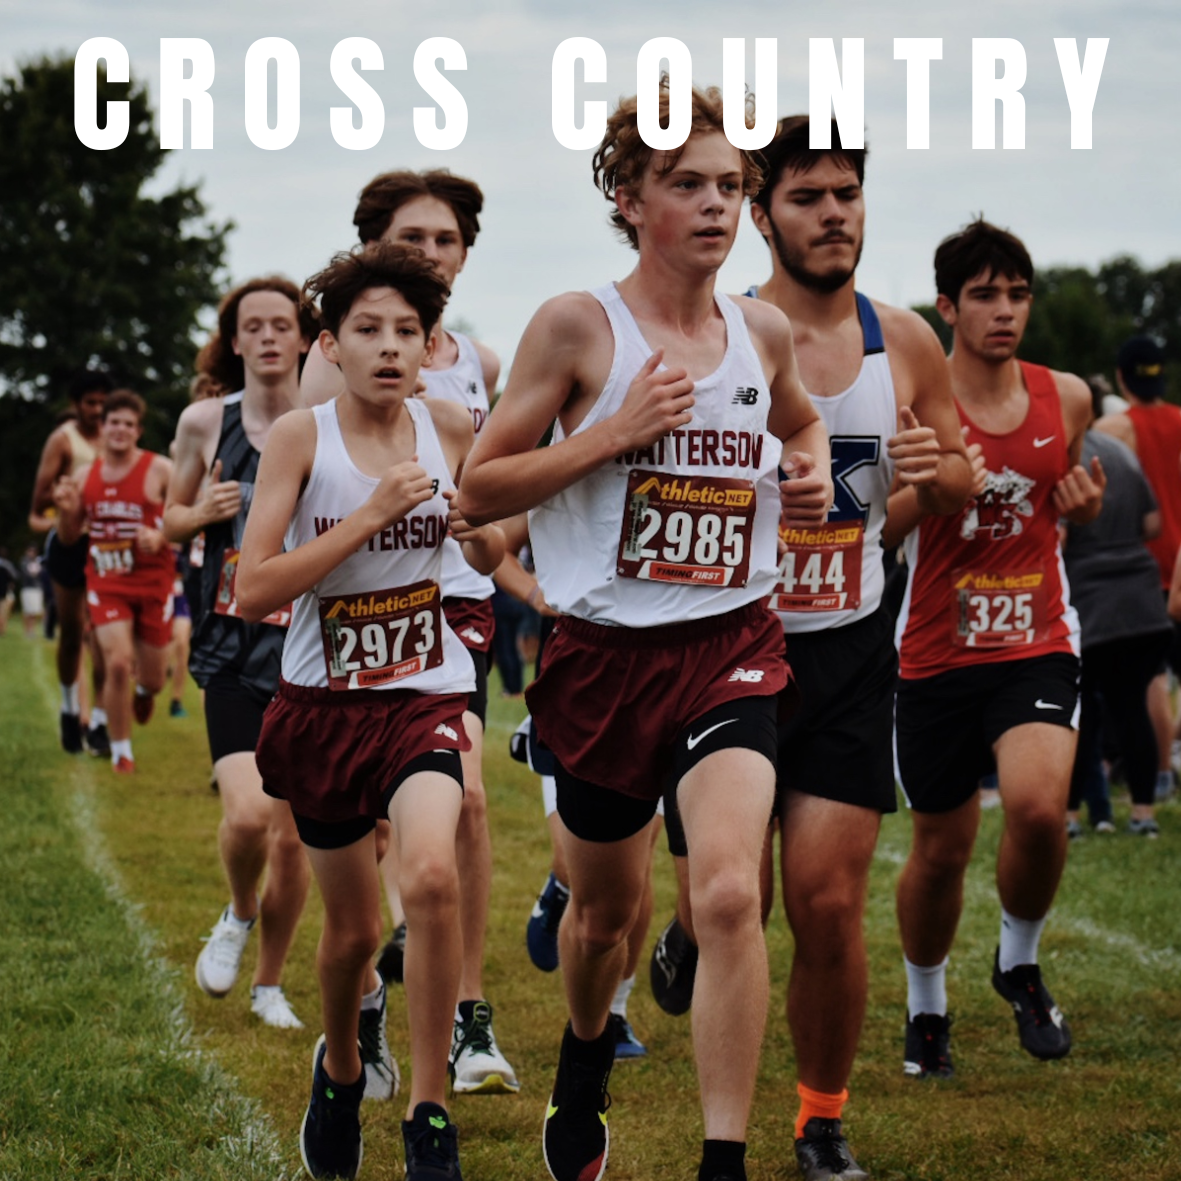 several boys running cross country for school